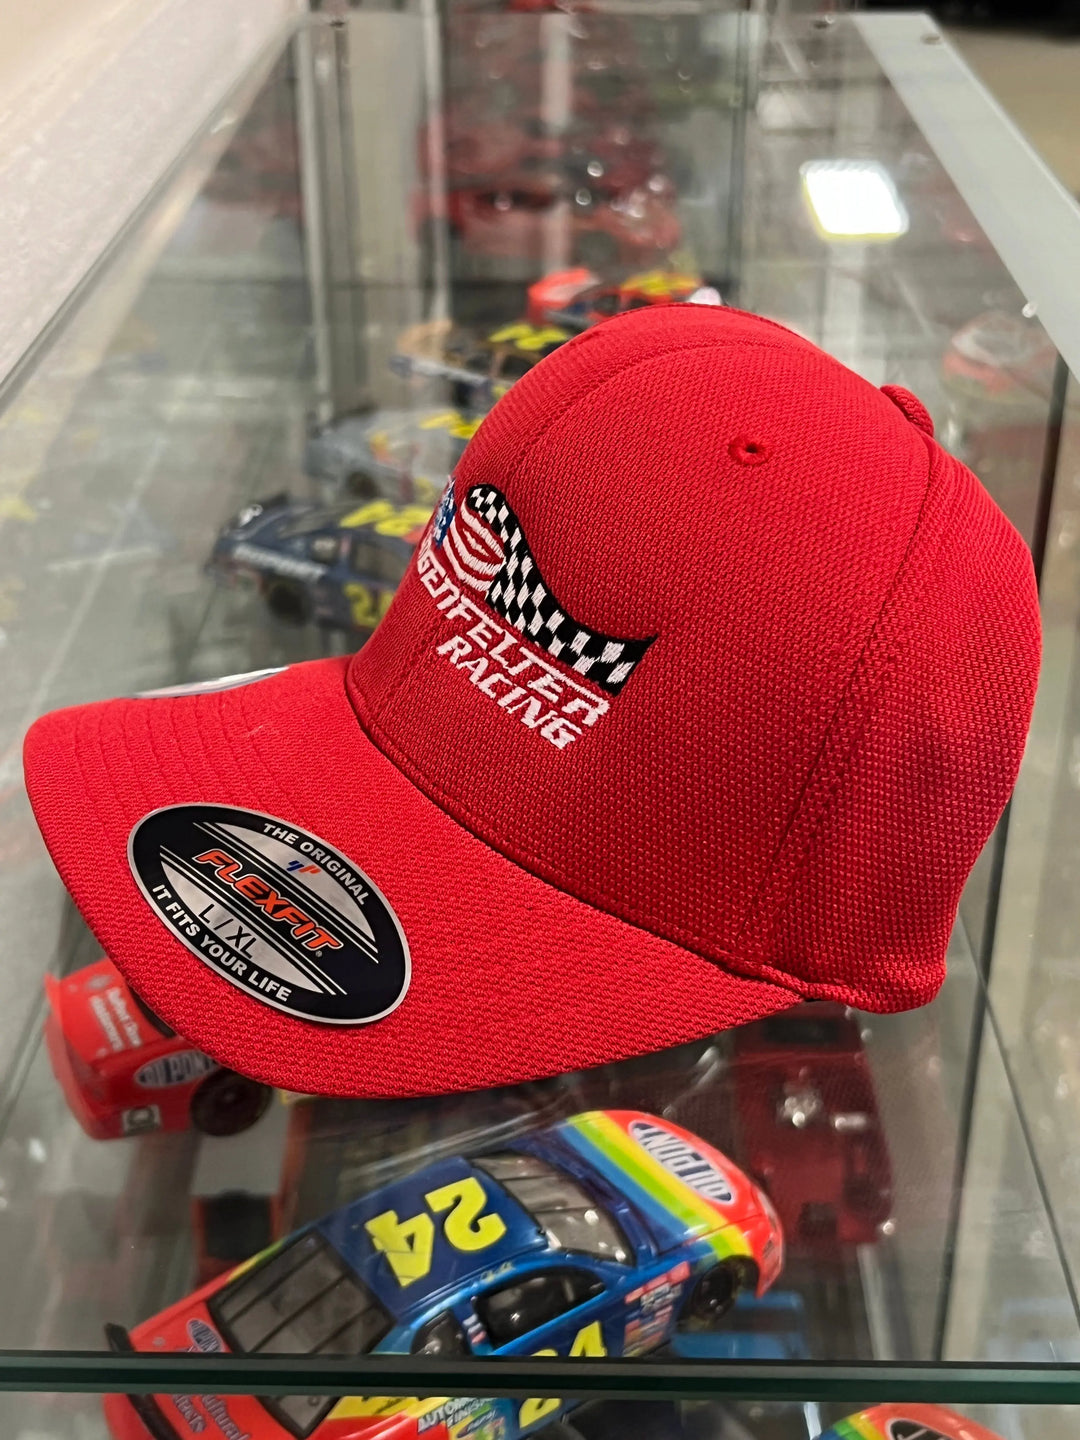 Lingenfelter Performance Engineering Racing RED Hat